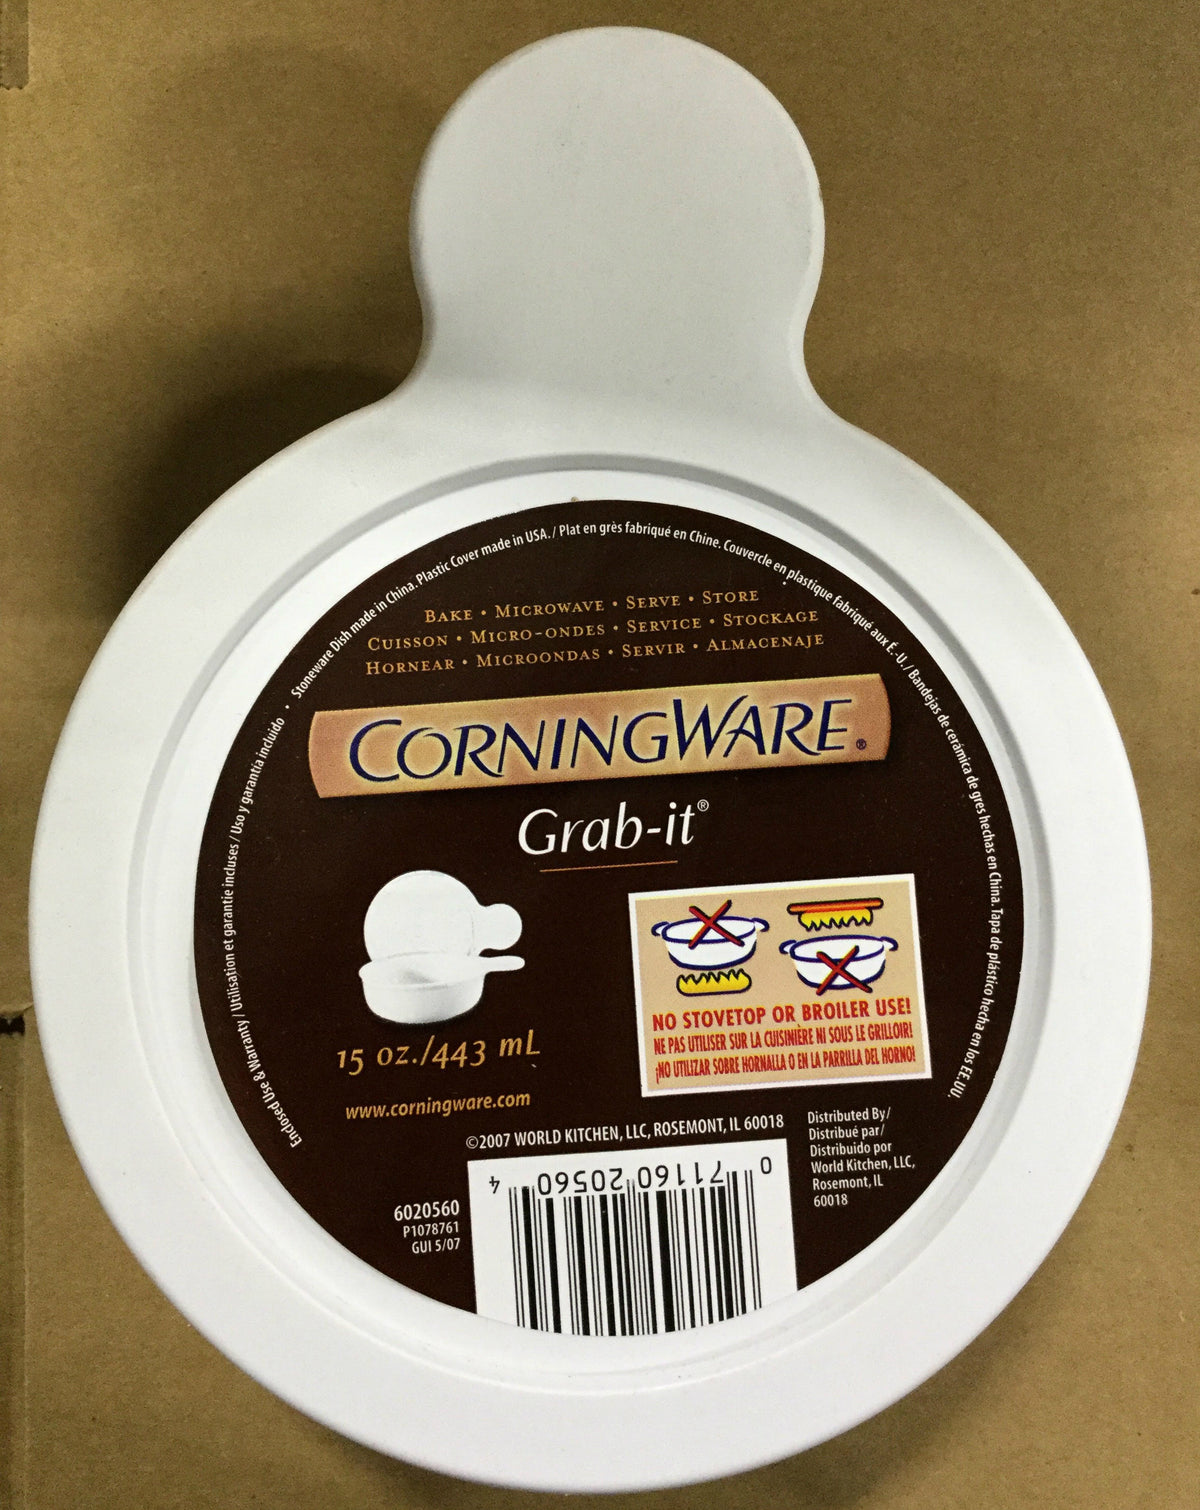 CorningWare 6020560 French White 15-Ounce Grab-It Dish with Cover